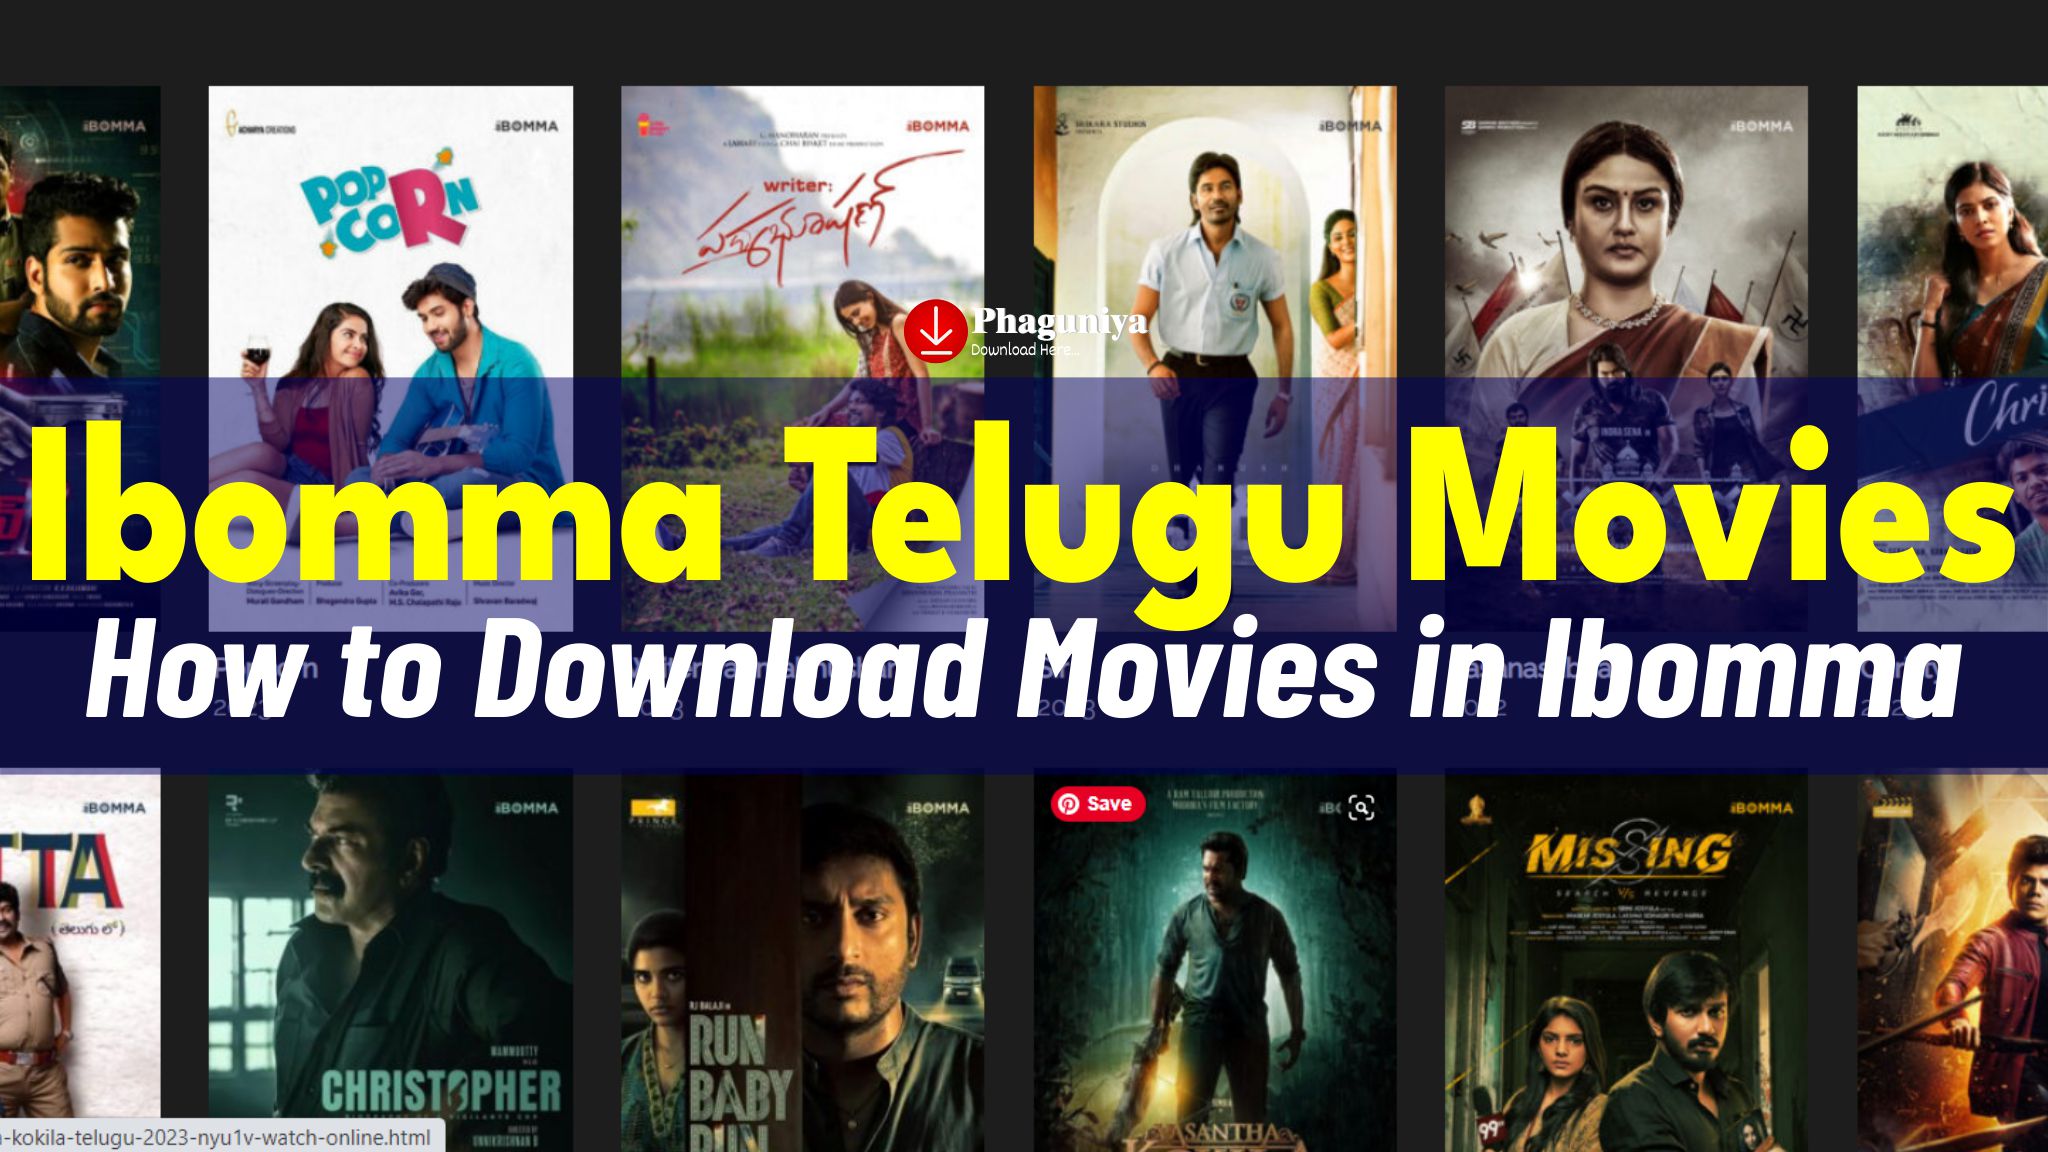 ibomma Telugu Movies, ibomma Latest Update 2023, ibomma: Download the Latest Web Series & HD Movies, Available Movies by Size on ibomma, ibomma Movies Video Quality, Category Of Movies On ibomma Website 2023, How To Download Movies From ibomma?, ibomma Movie Download Website Features, ibomma Available Movies Type, ibomma Apk, illegal Alternative To ibomma, Legal & Safe Alternative Of ibomma, ibomma New Website 2023, ibomma Active Links 2023, ibomma.com 300MB 480P, 720p, 1080p Movies Download, List of Leaked Movies by ibomma 2023, Upcoming Telugu Movies by ibomma, Upcoming Web Series By Ibomma, ibomma com: Latest HD Movies & TV Shows, Truth Of The ibomma Movies Download Website?, ibomma Telugu Dubbed Movies Download Trend, Why is ibomma such a popular website?, Is ibomma a Legal Website?, Is ibomma website free?, Is the ibomma website safe?